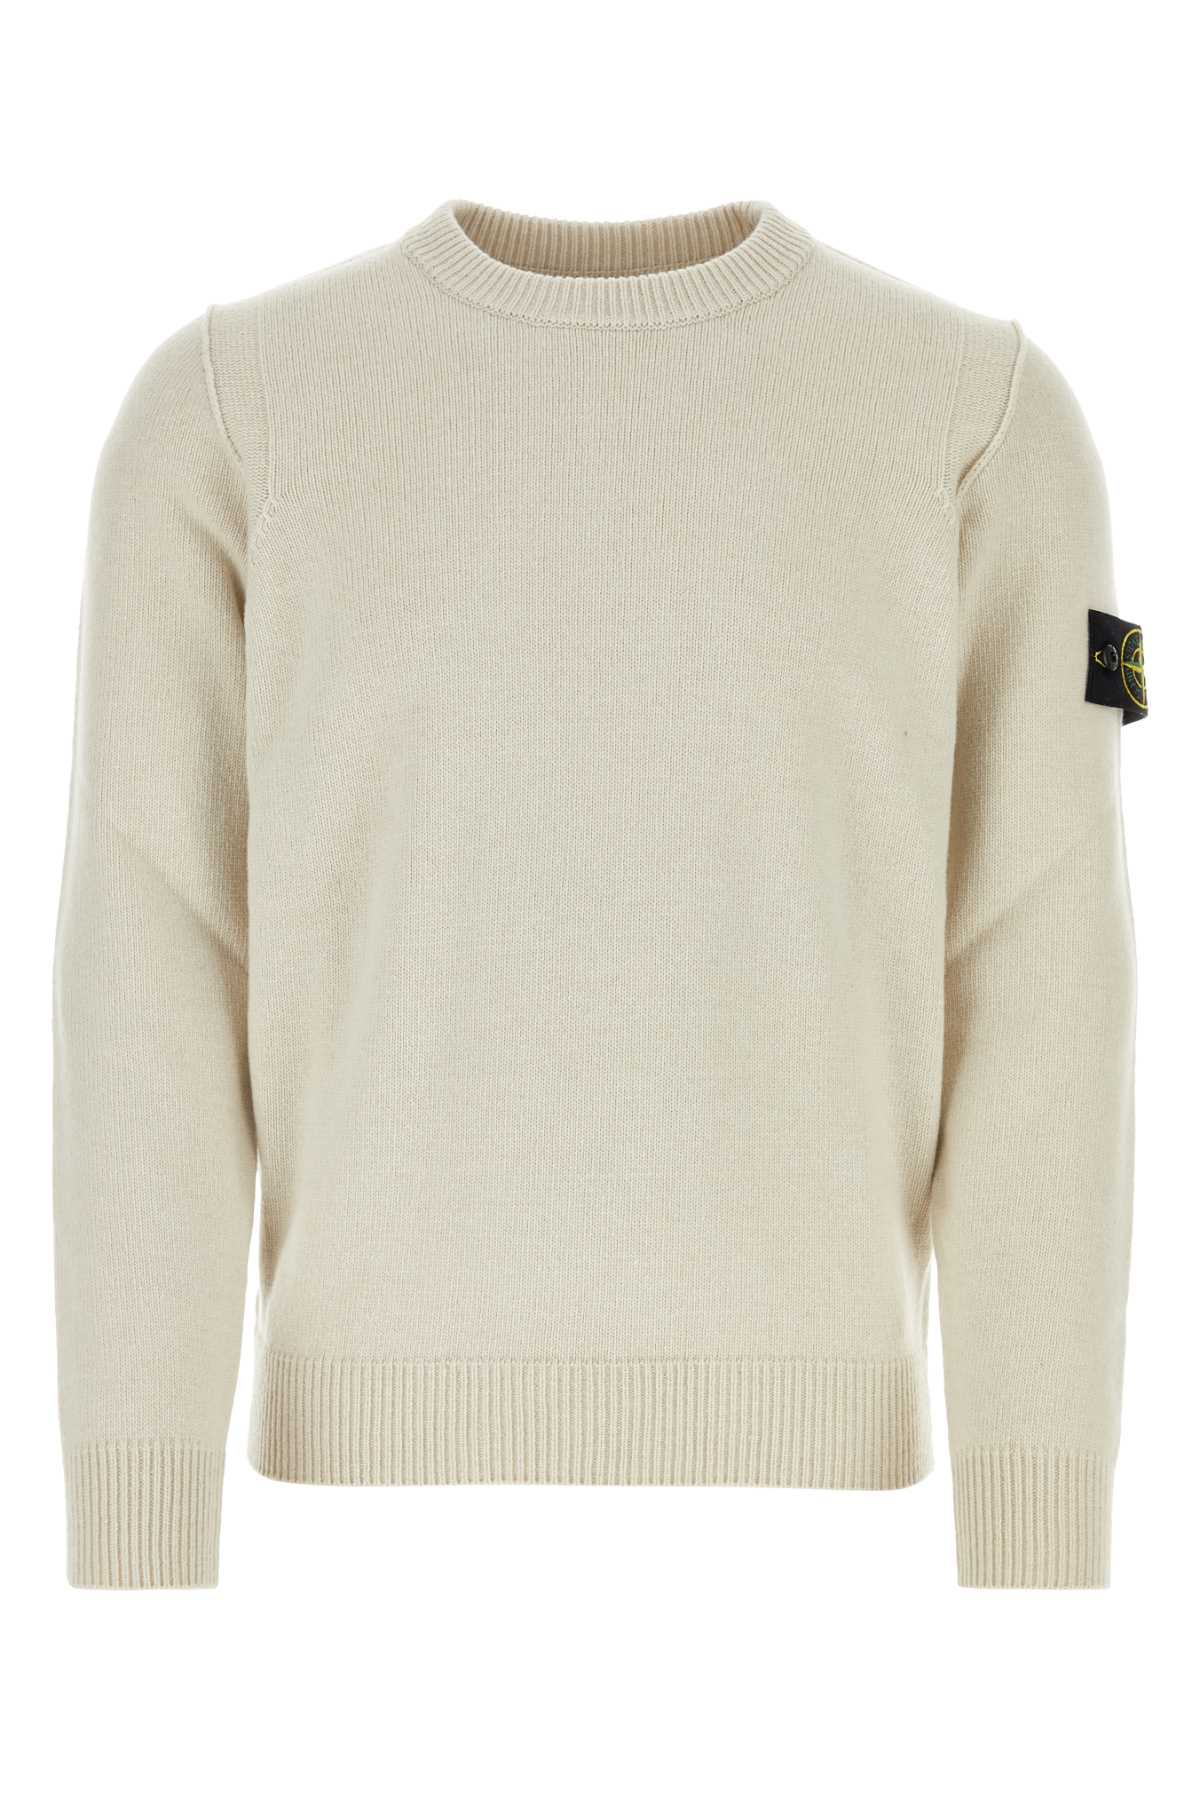 Stone Island Sand Wool Blend Sweater In Gold